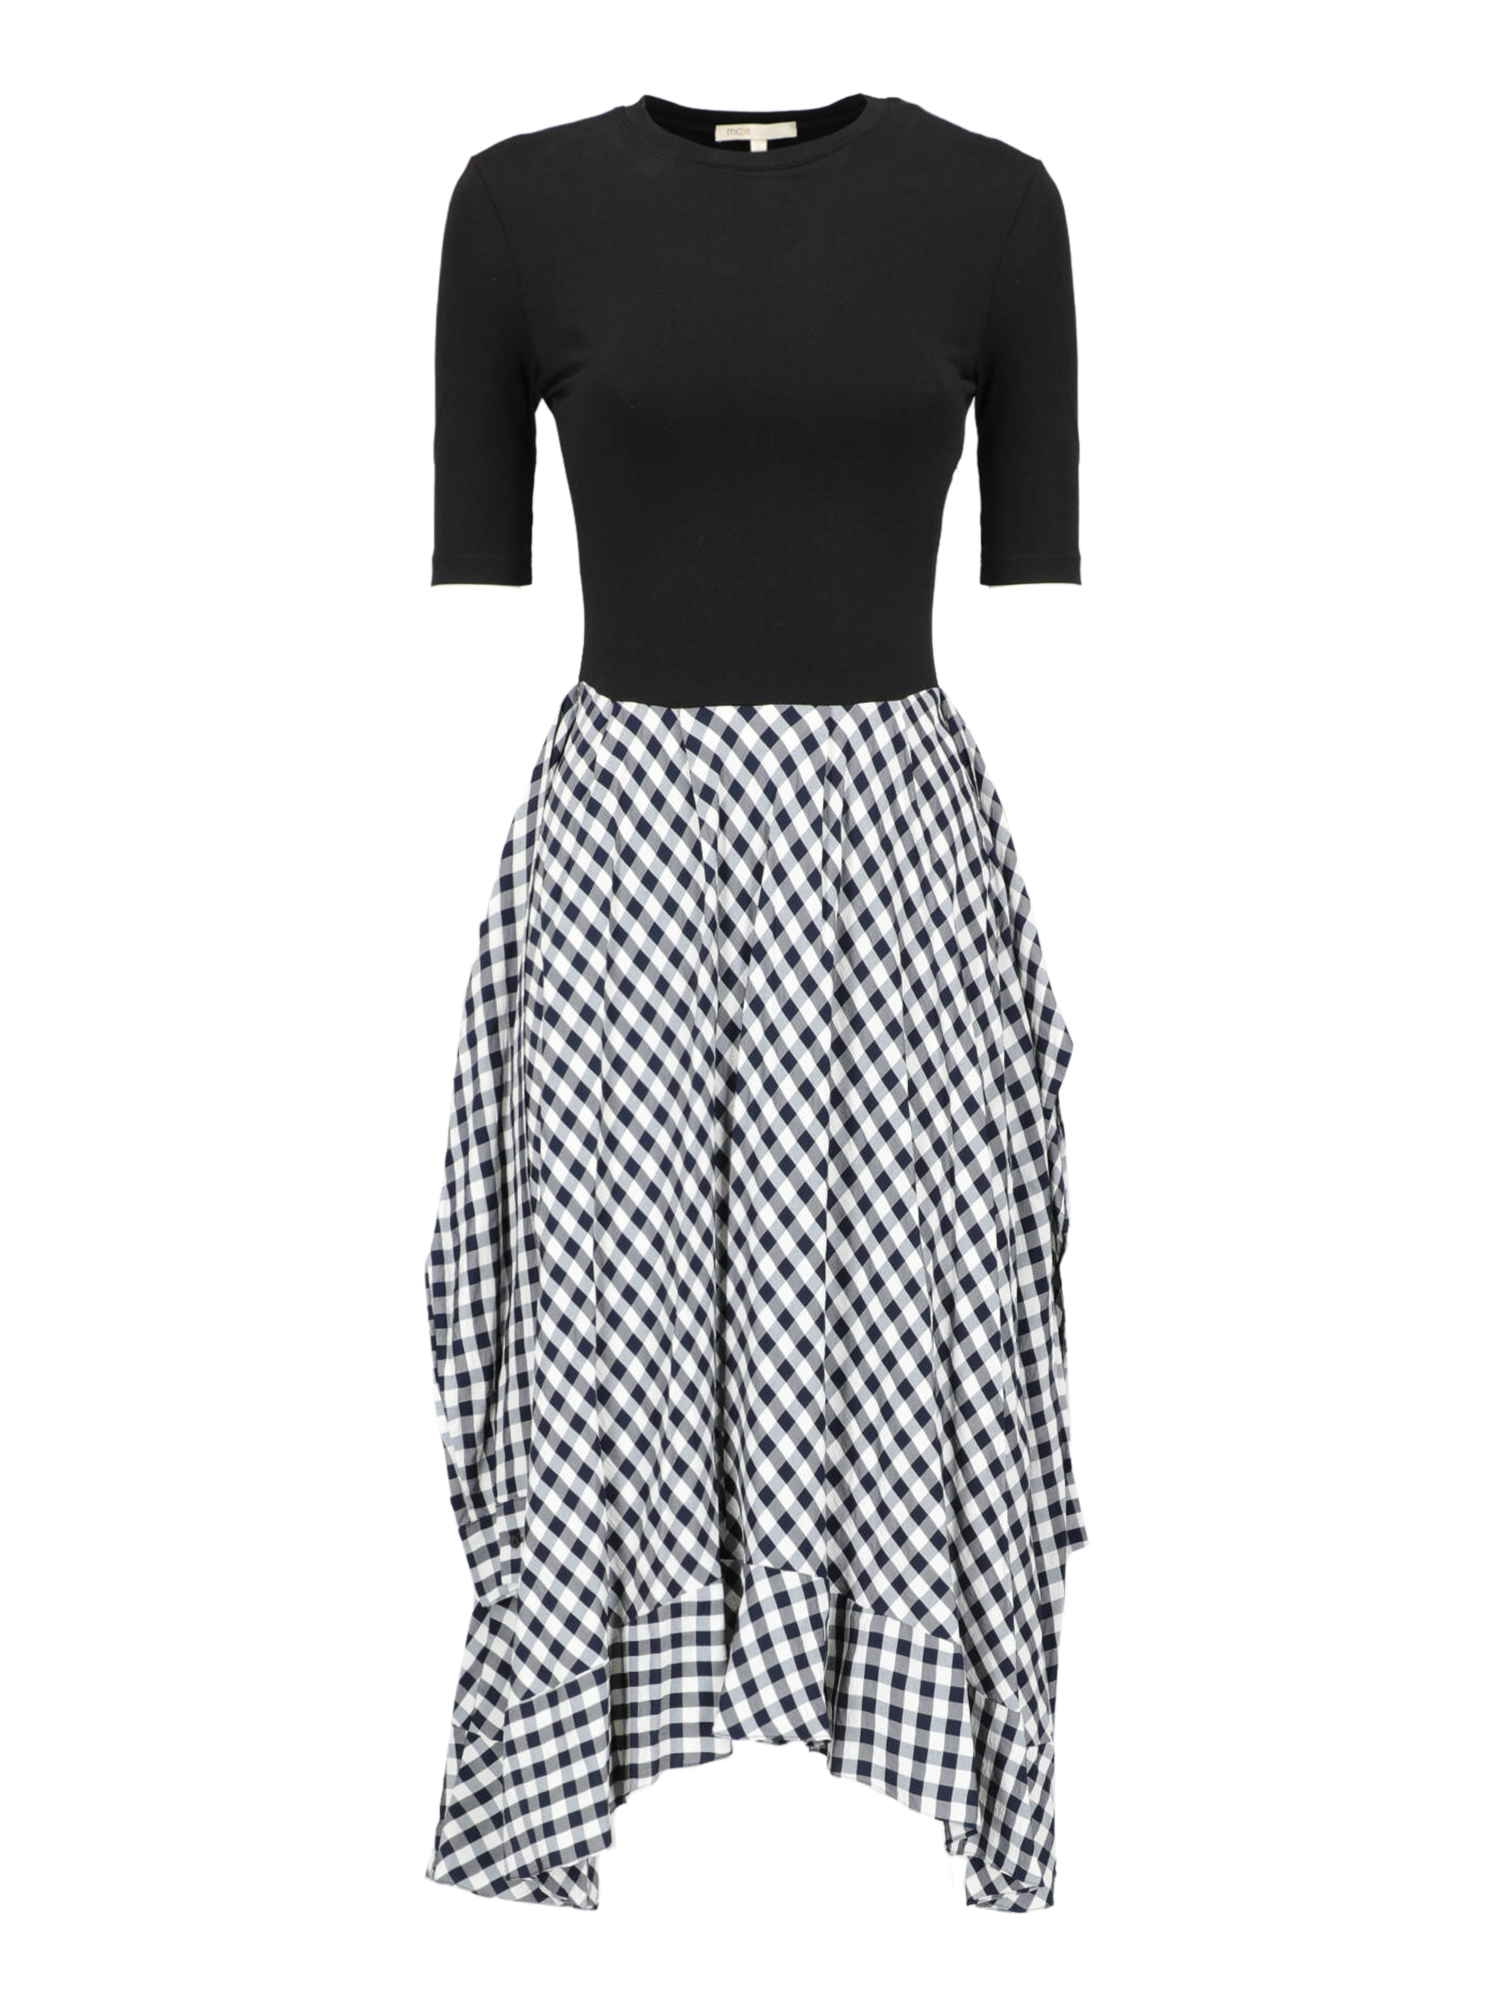 Condition: Very Good, Gingham Print Cotton, Color: Black, Navy, White - S -  -